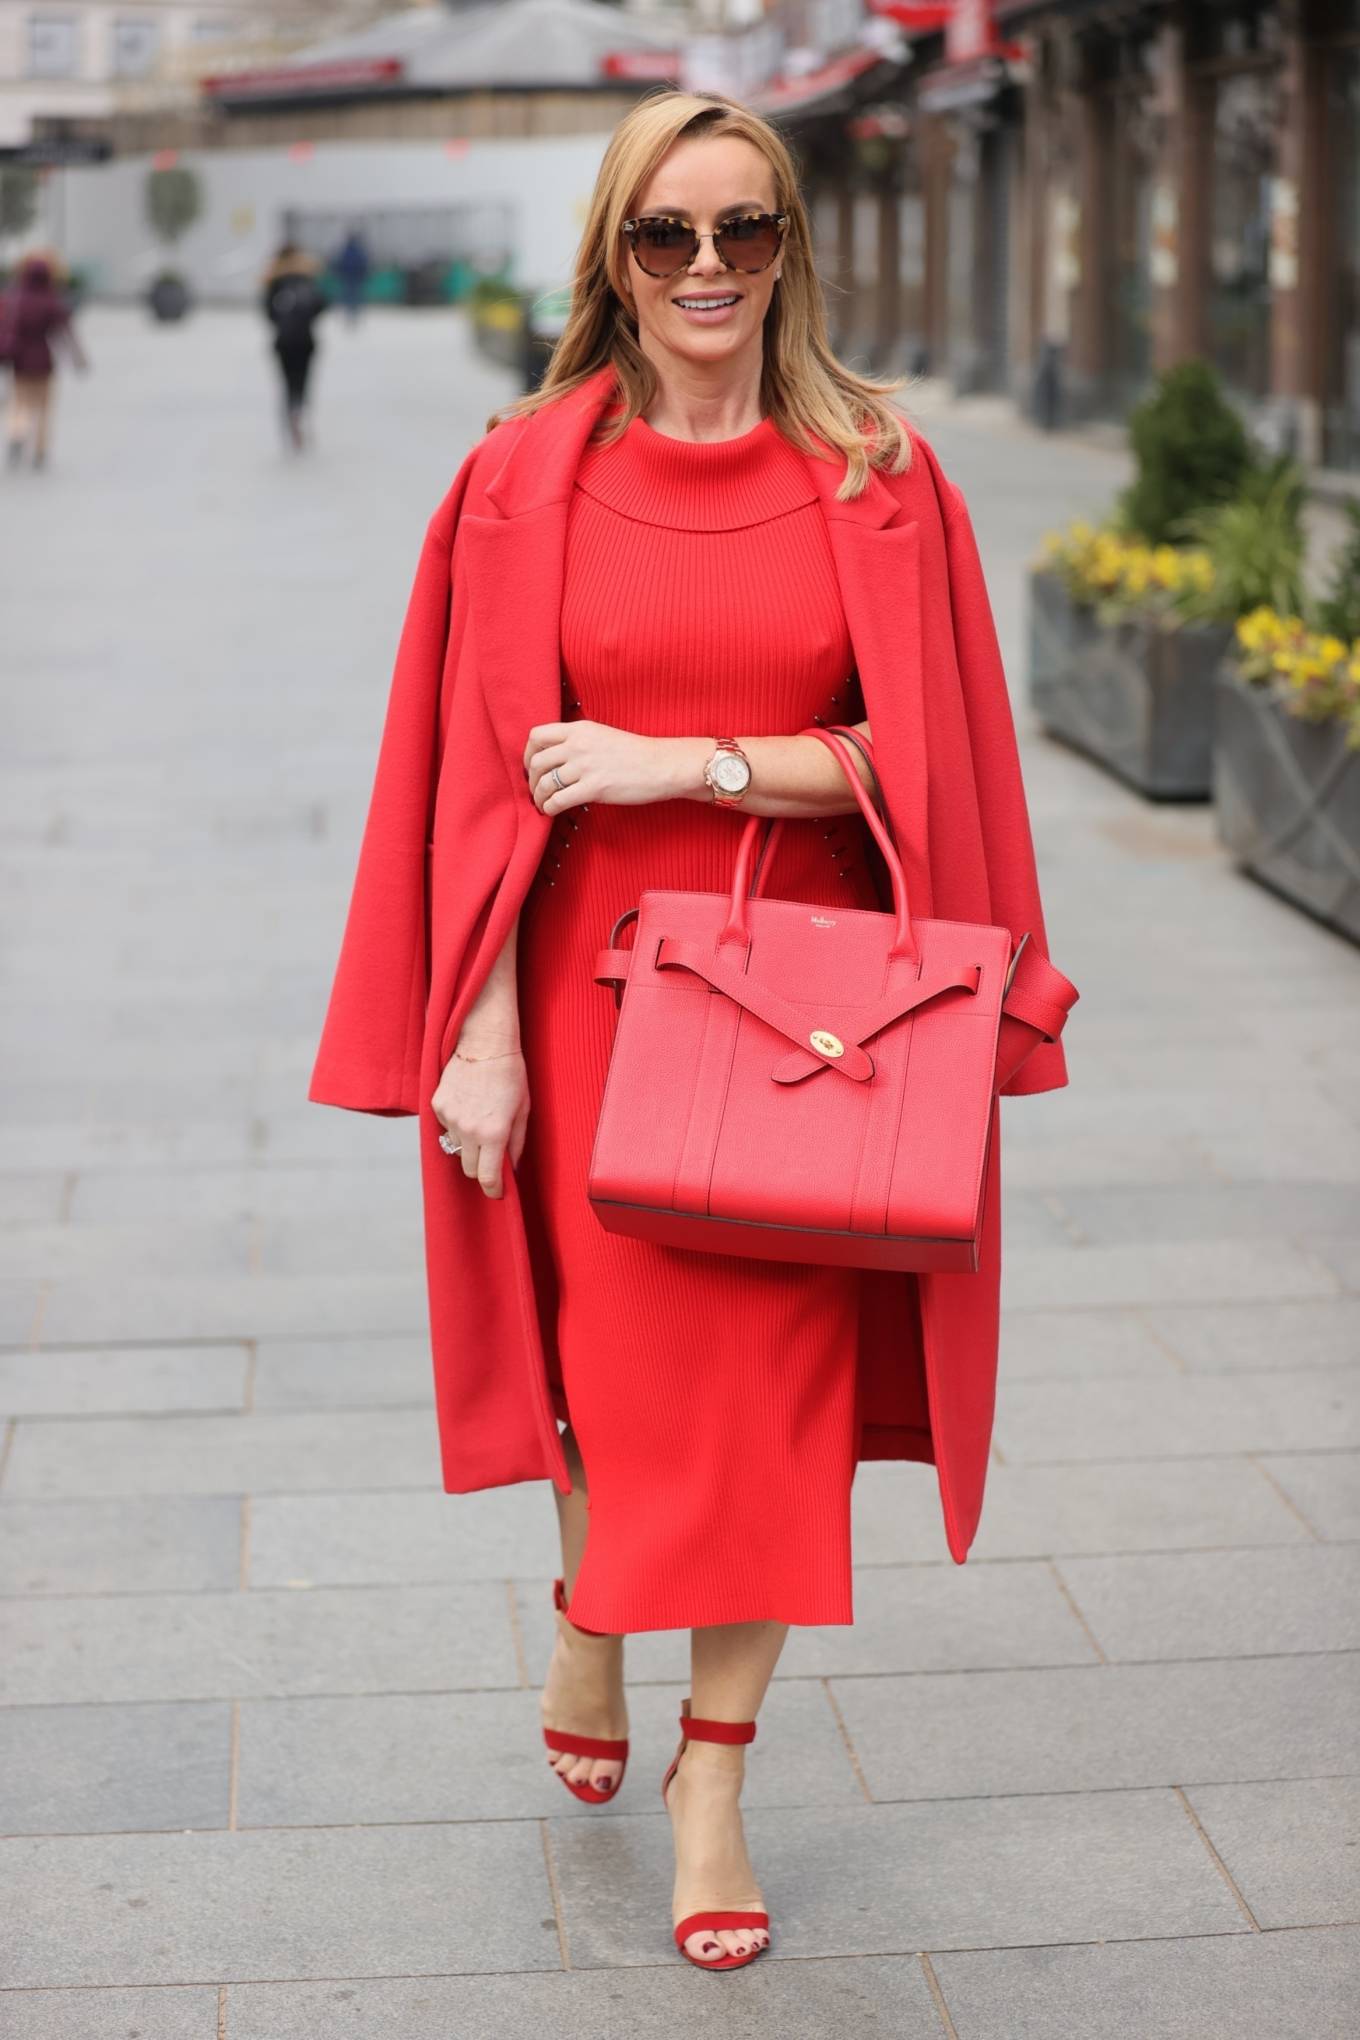 Amanda Holden - All in red at Heart Radio Studios in London